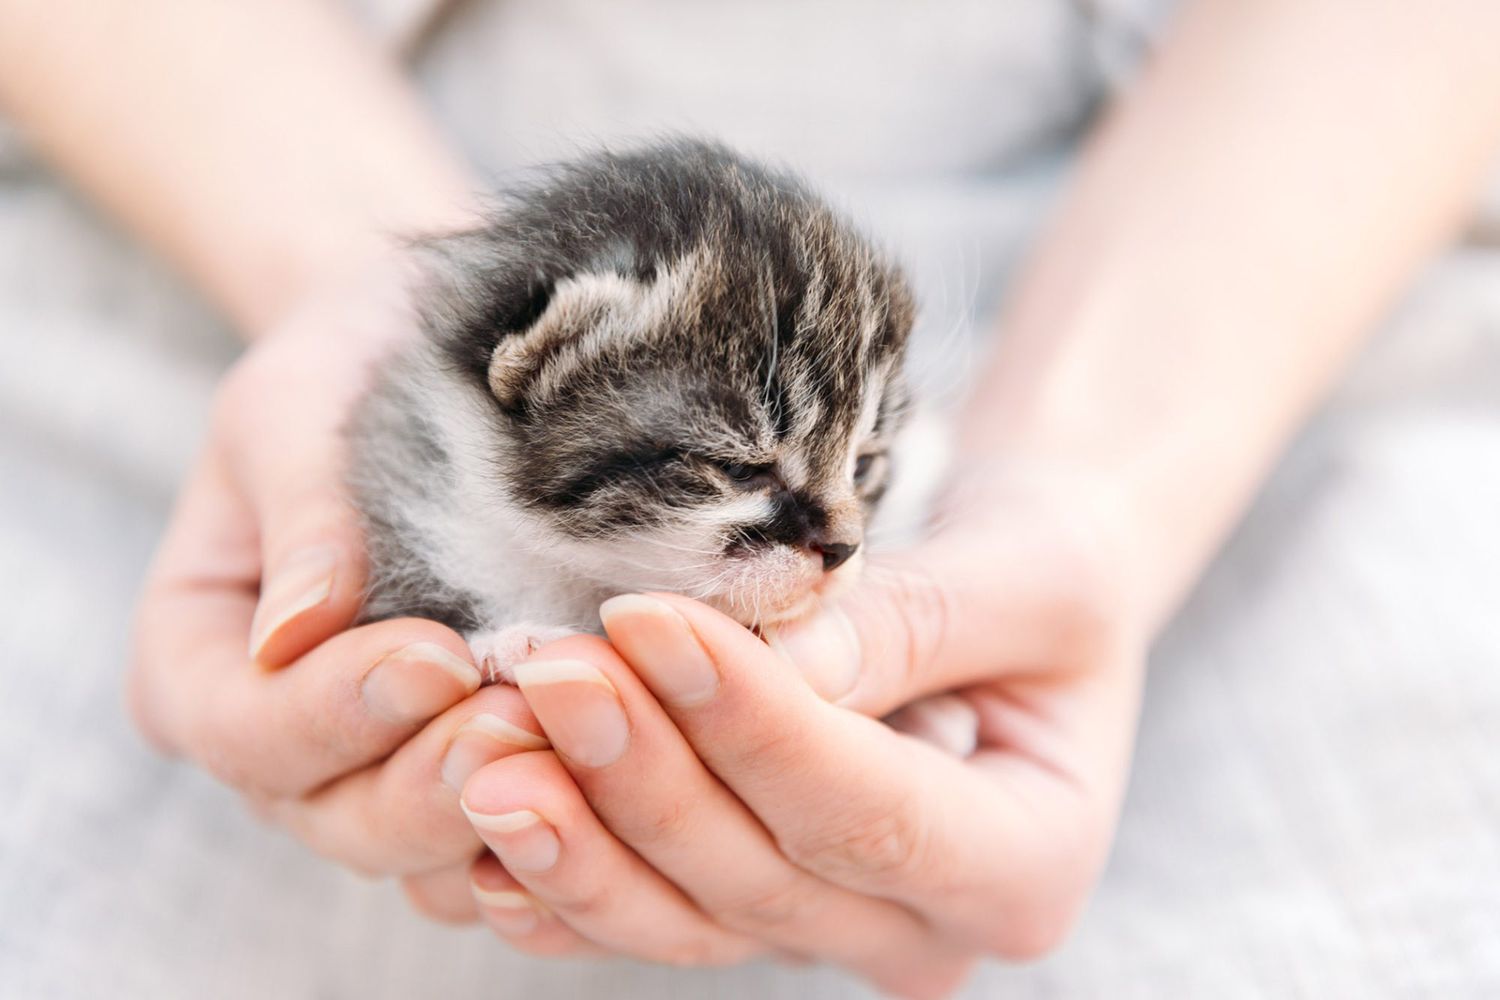 Woman holding tiny kitten in her hands